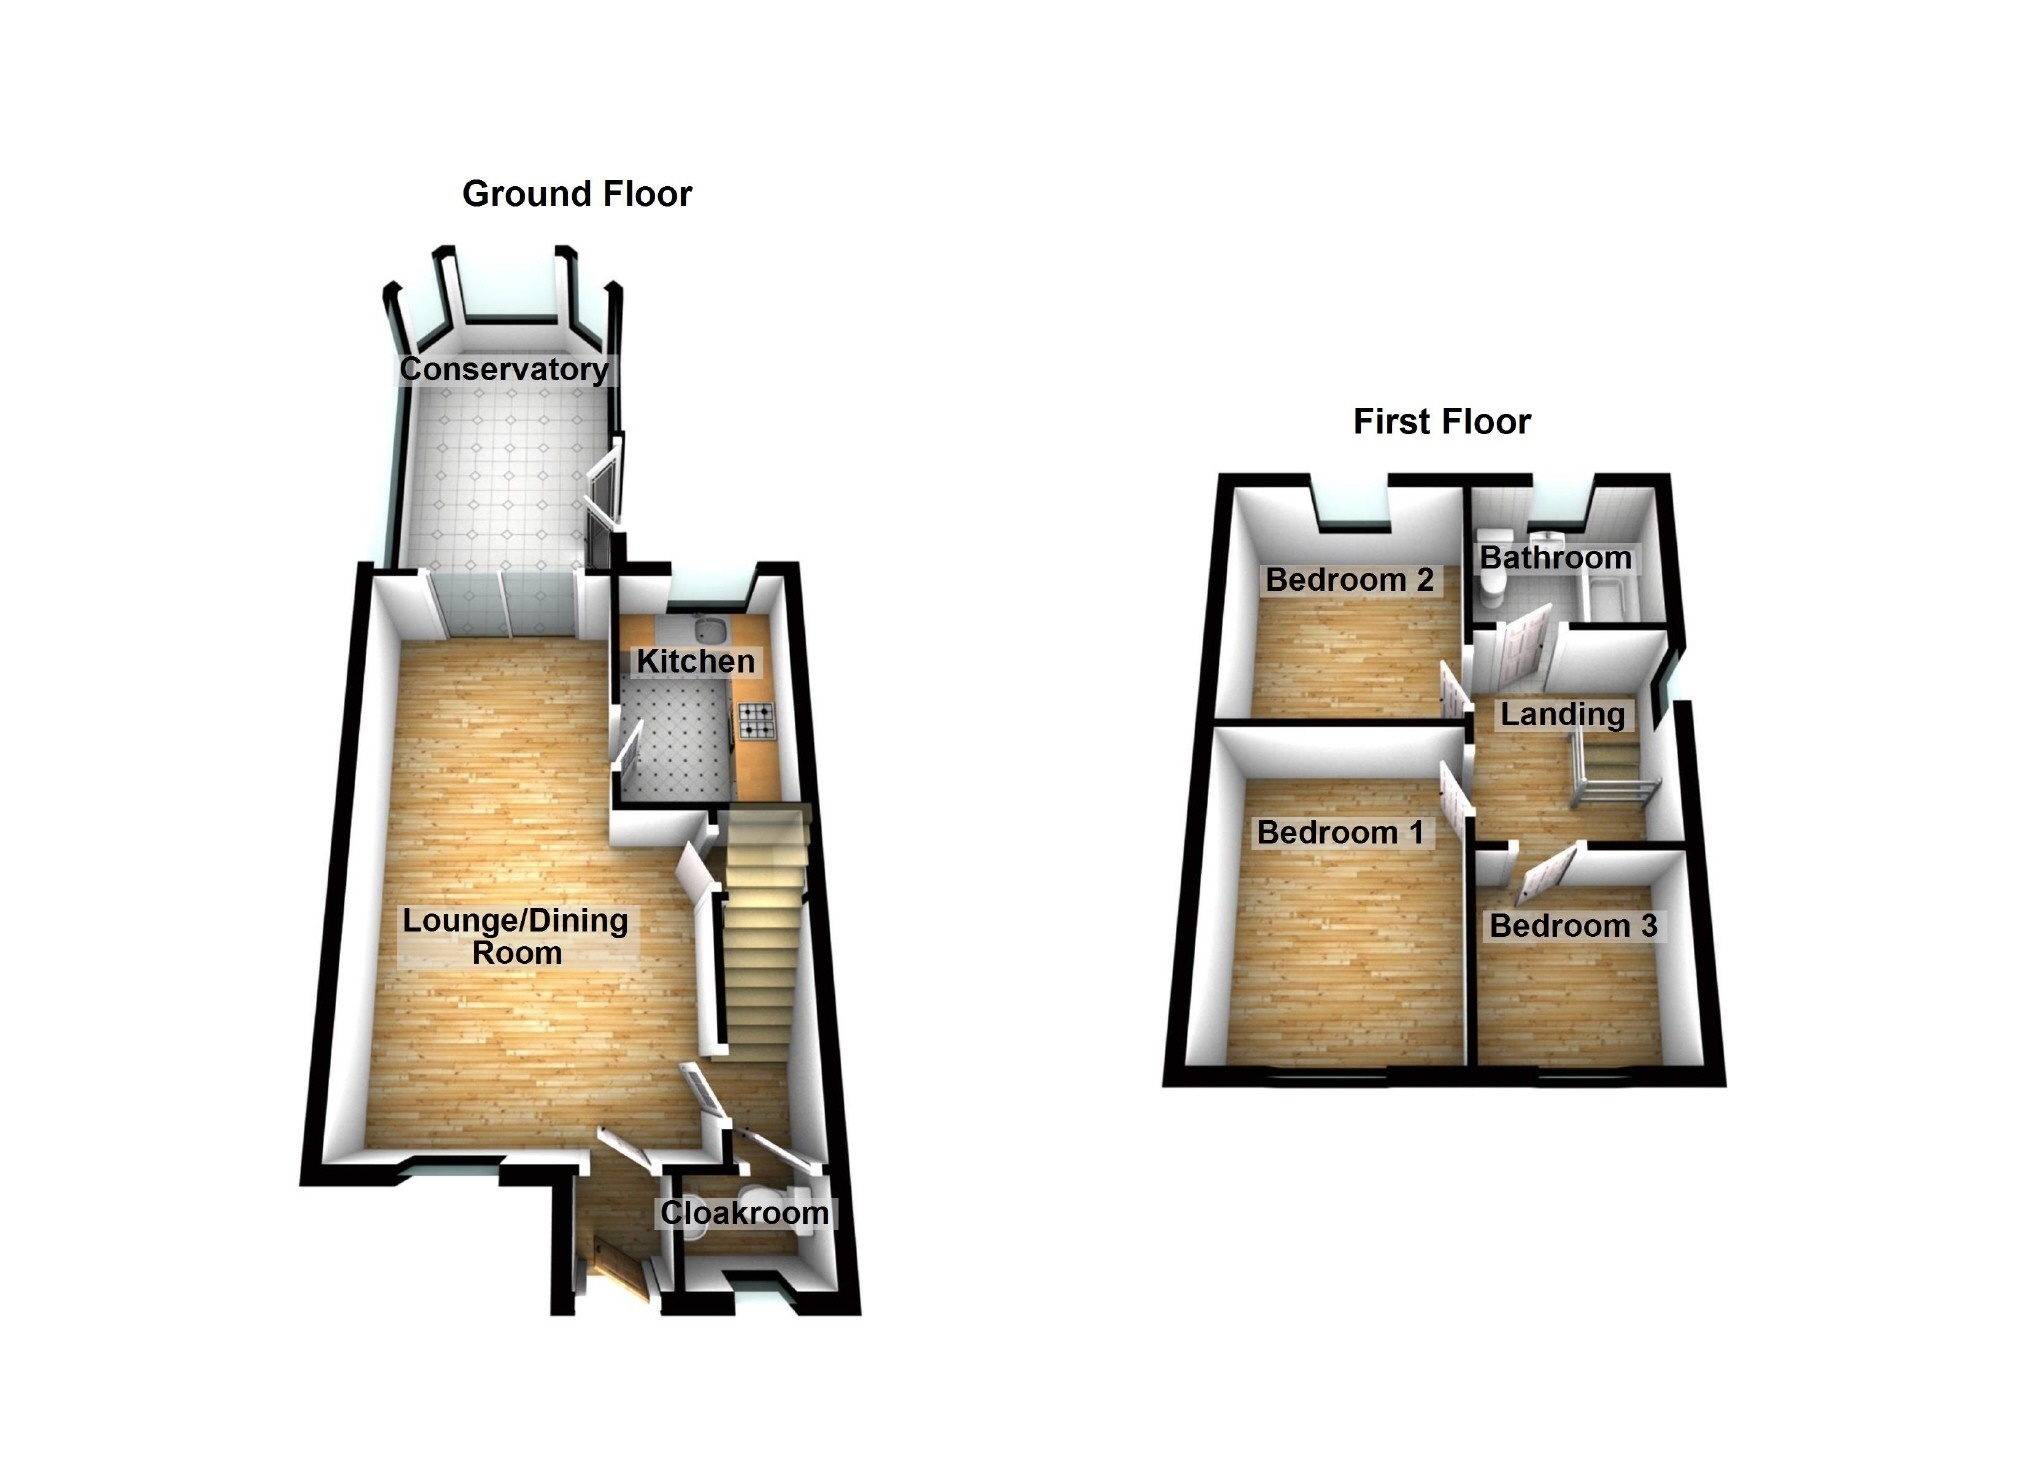 Fascinating 3 bedroom semi detached house for sale in west allotment with 3 bedroom semi detached house plans